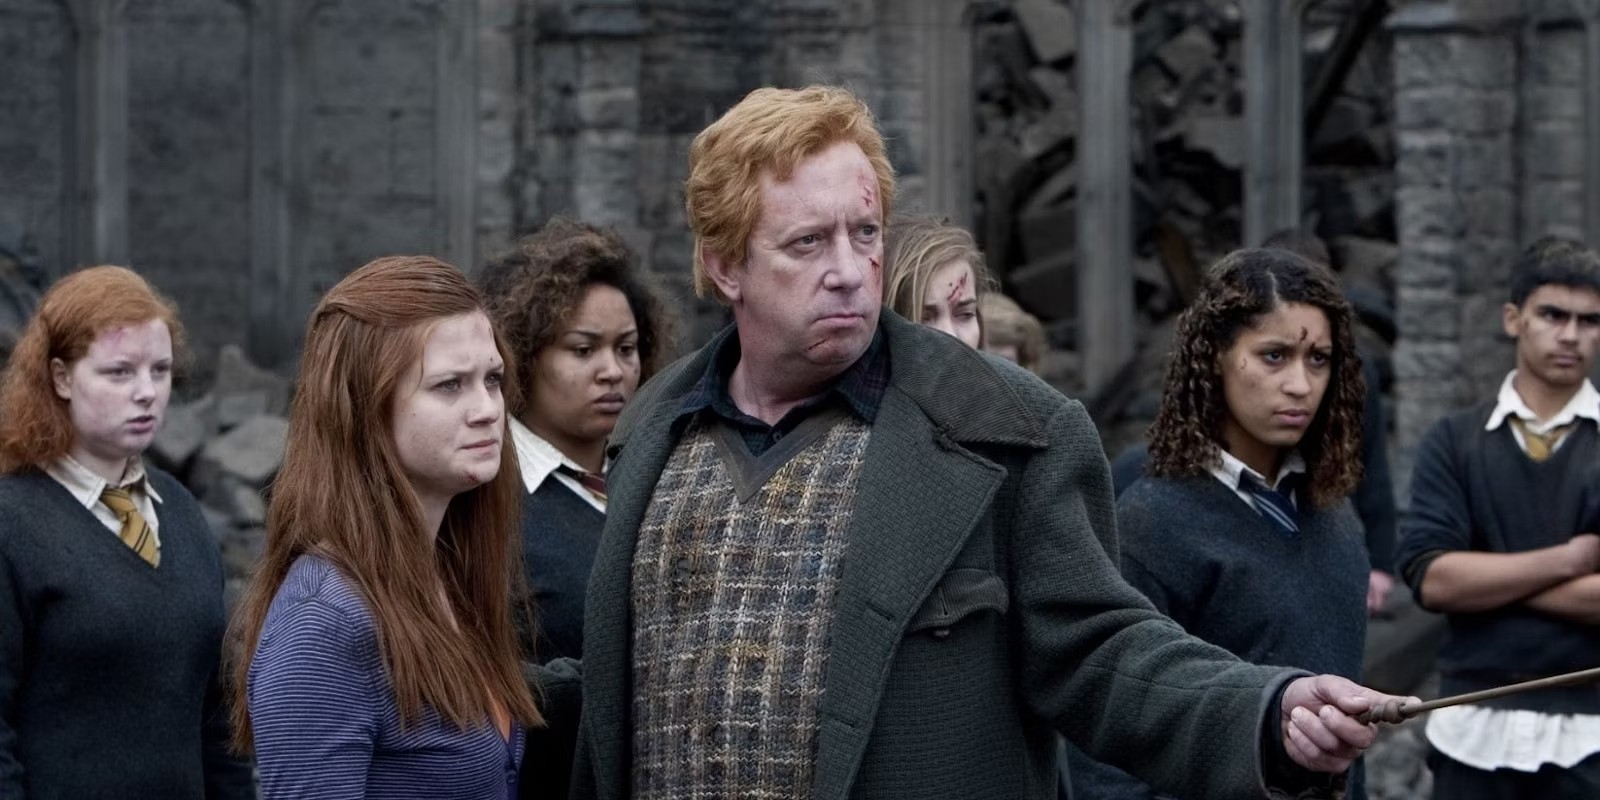 Mark Williams as Arthur Weasley in a still from the Harry Potter franchise